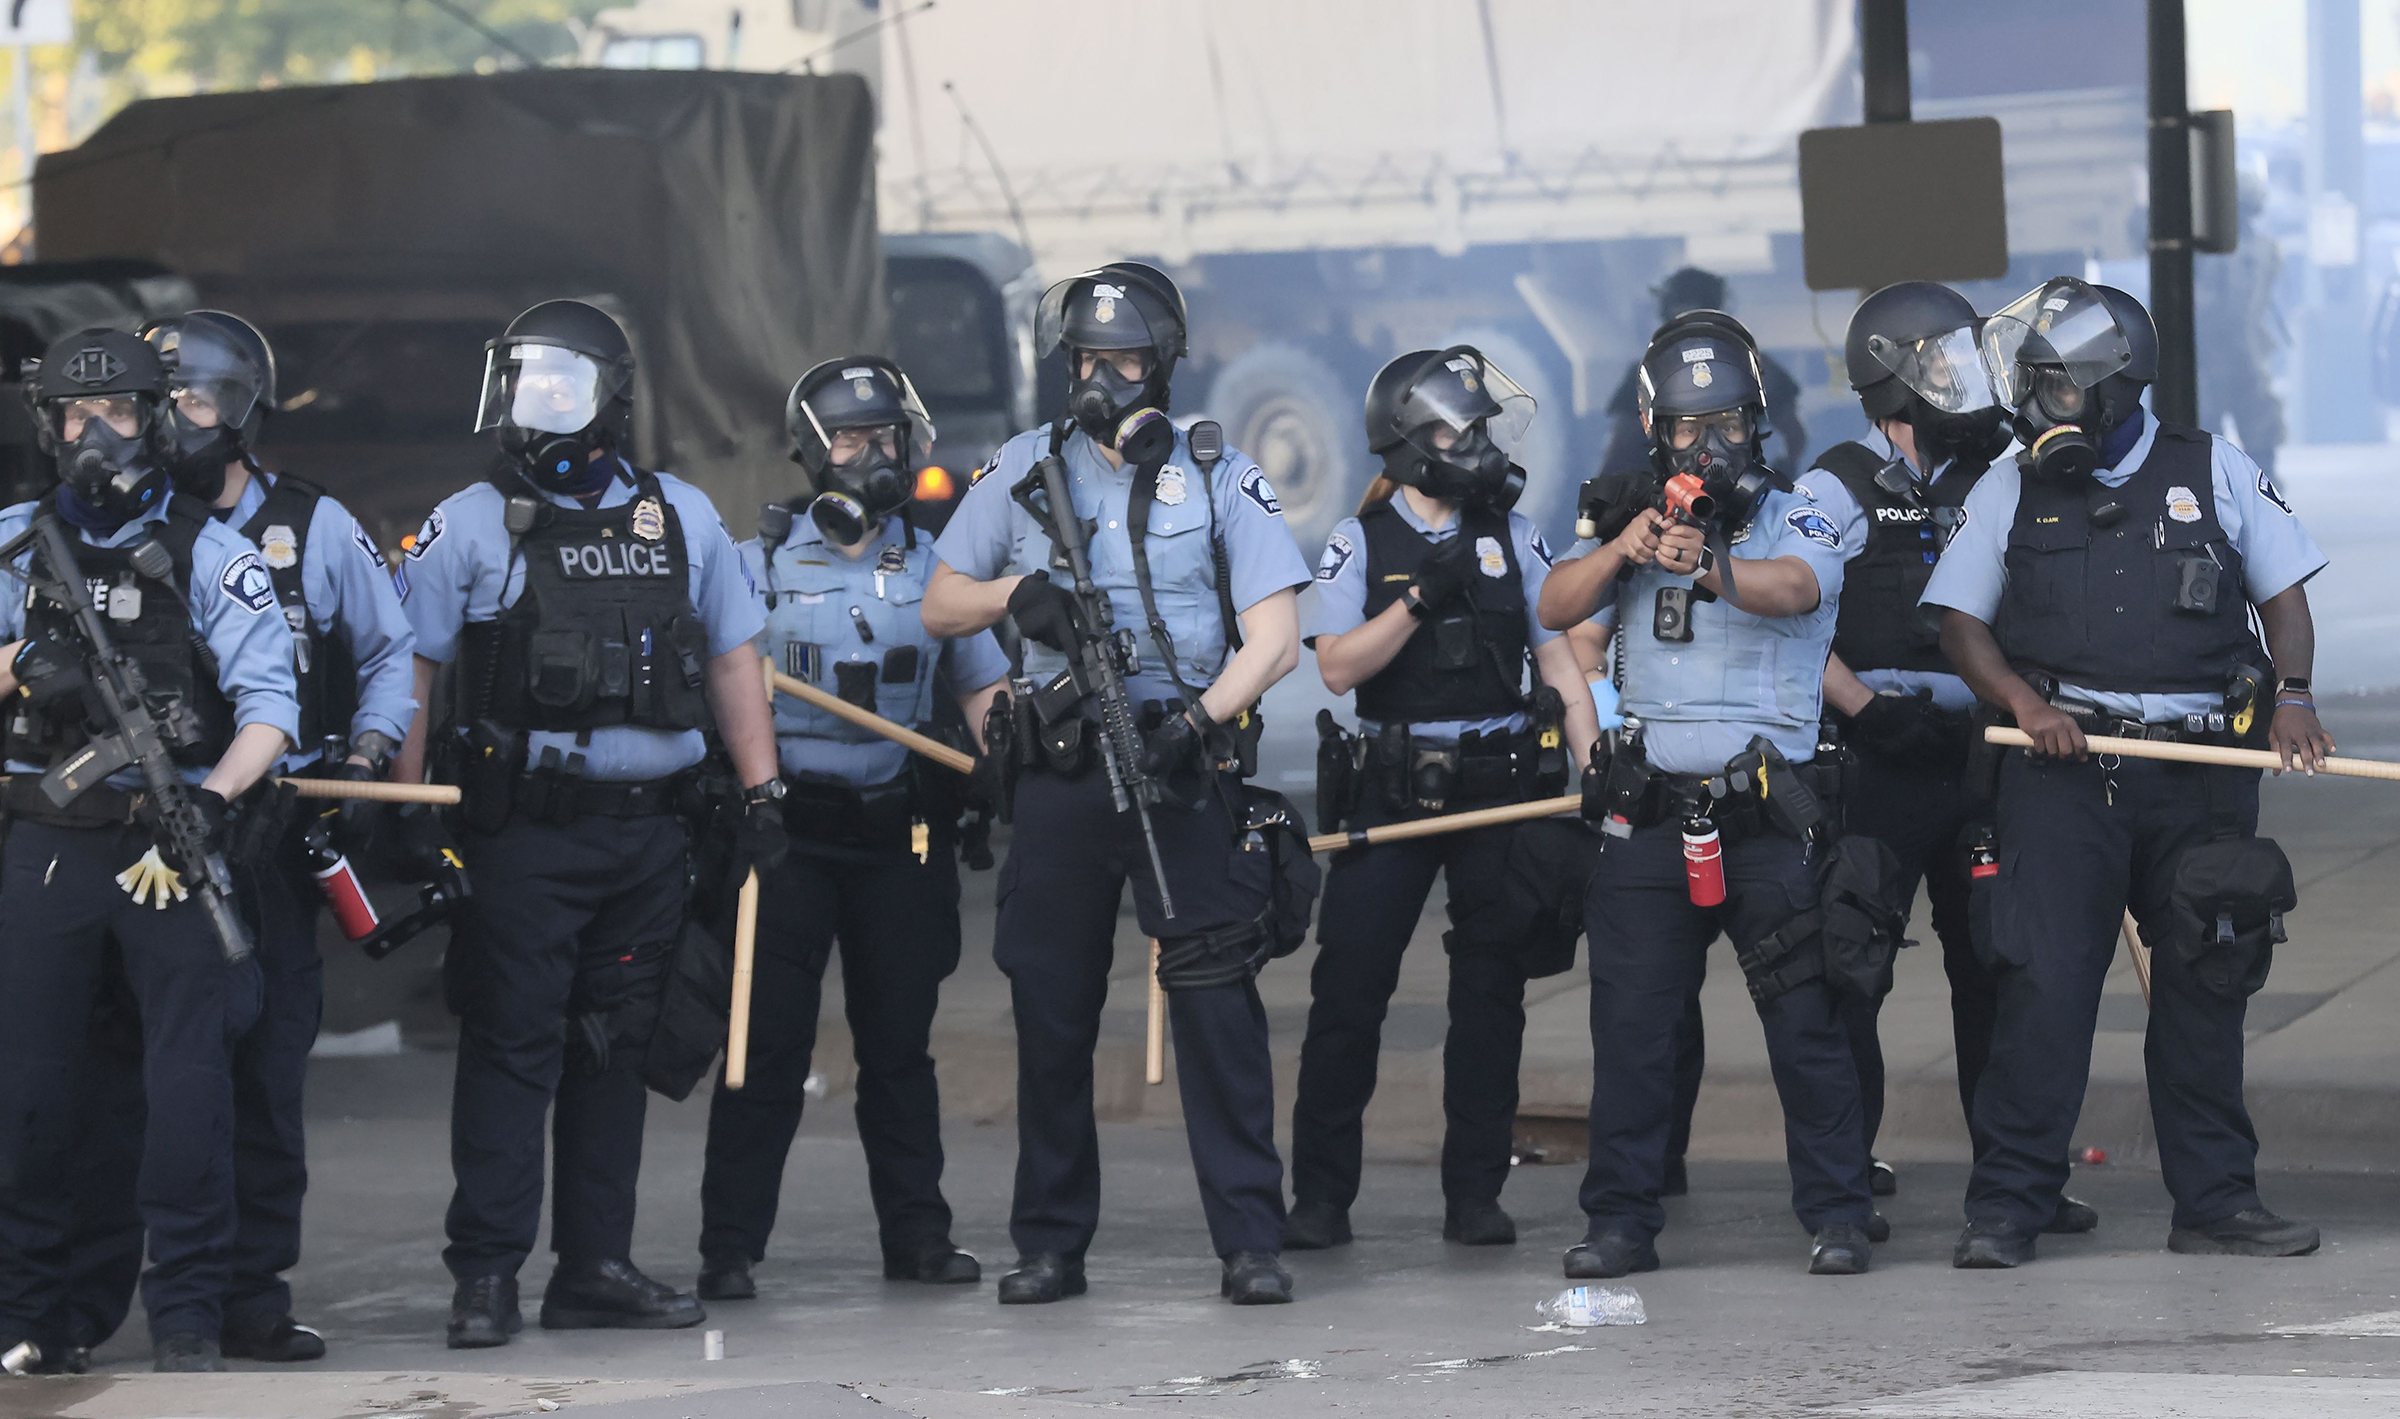 Members of the Minneapolis Police Department face off with protesters during a fourth day of protests over the arrest of George Floyd, who later died in police custody, in Minneapolis, Minnesota on May 29, 2020. (Tannen Maury—EPA-EFE/Shutterstock)